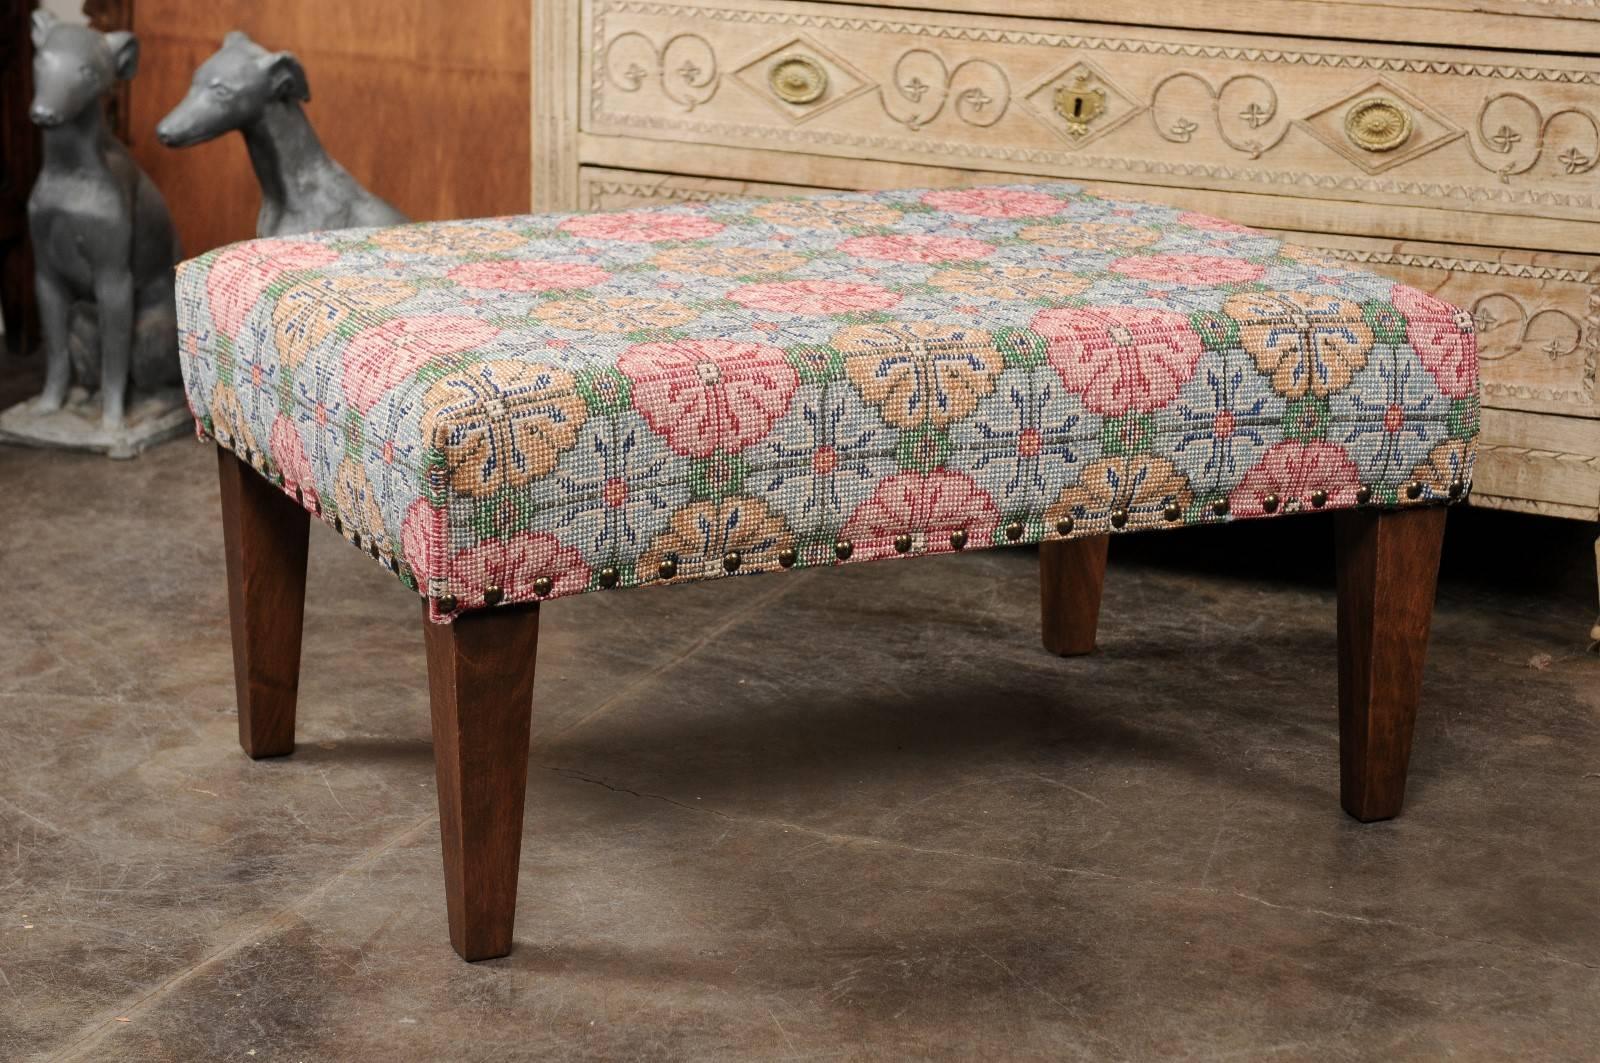 A Turkish upholstered ottoman with floral motifs from the midcentury on custom wood tapered legs. This ottoman features a rectangular seat, upholstered with a vintage Turkish wool rug, adorned with colorful floral motifs ranging from pink to light